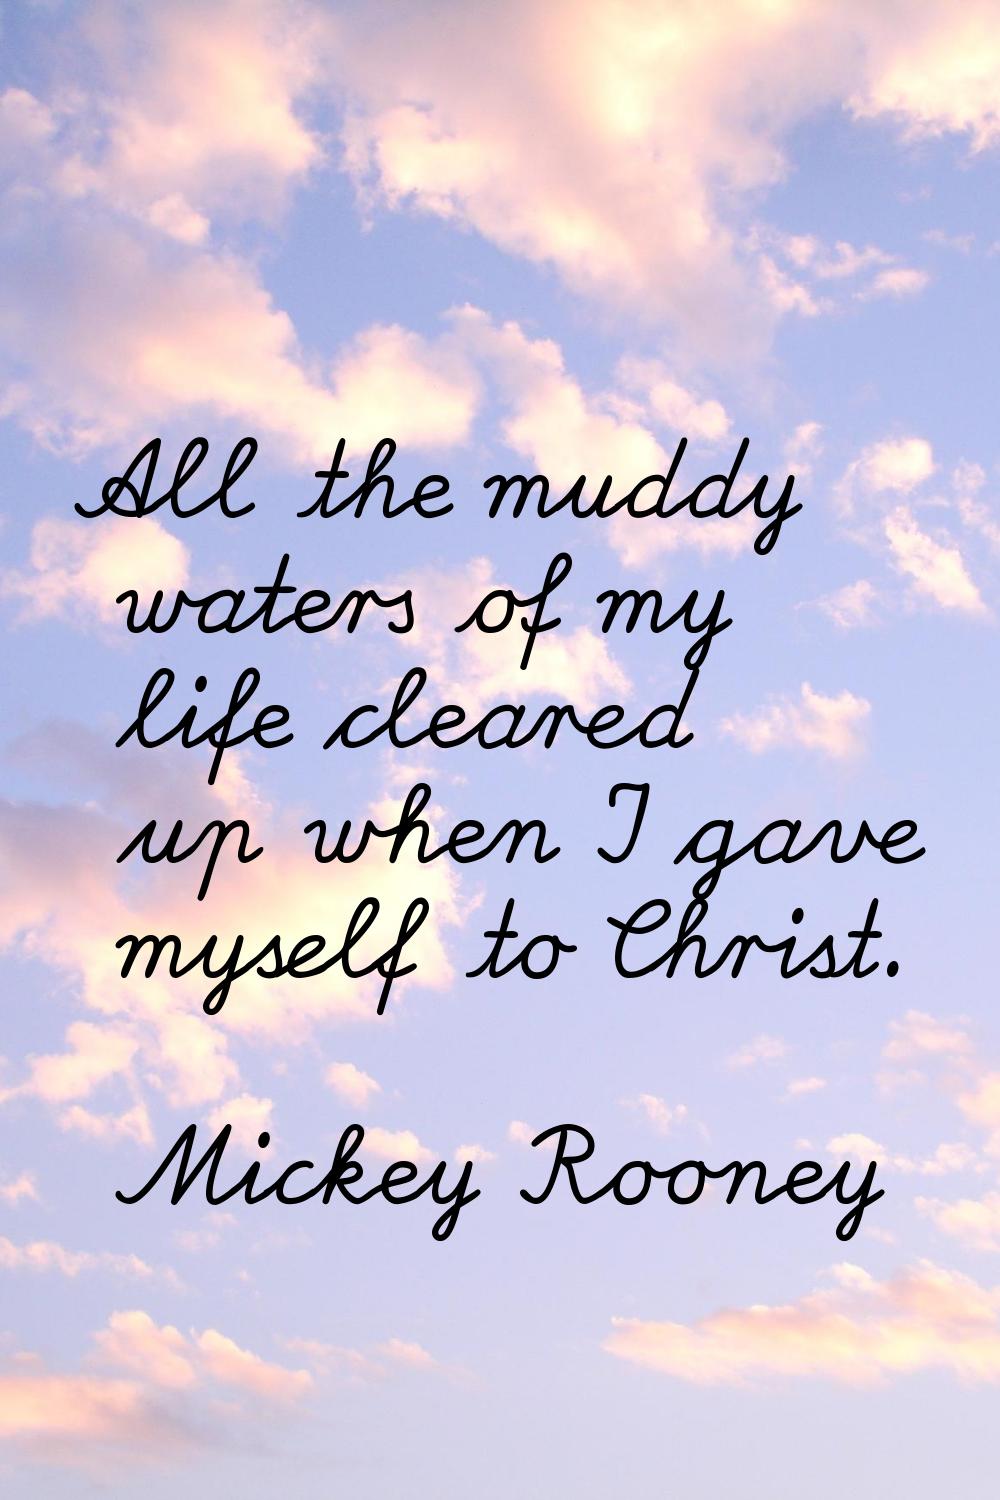 All the muddy waters of my life cleared up when I gave myself to Christ.